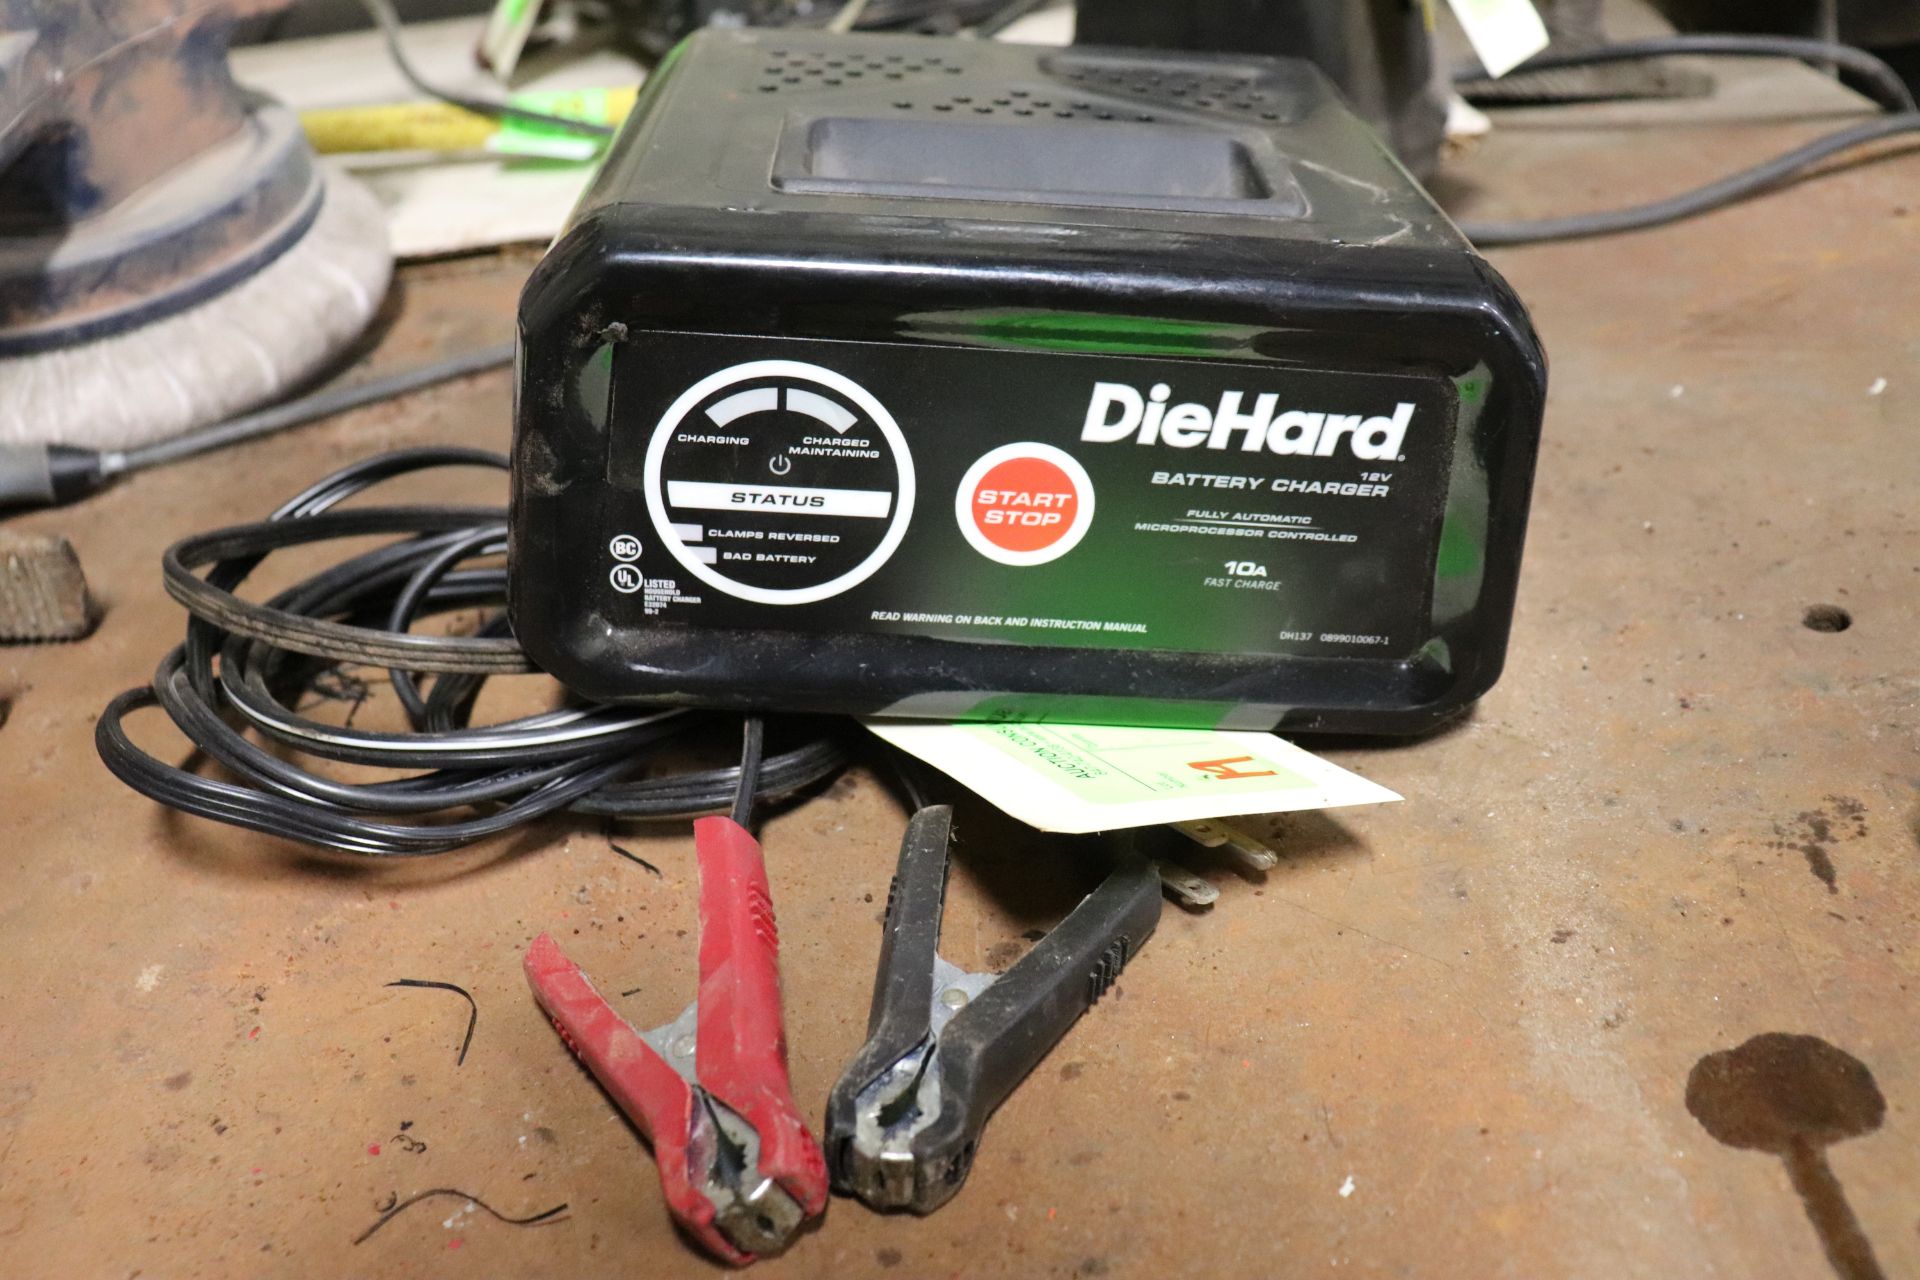 Die Hard 10-amp fast charge battery charger